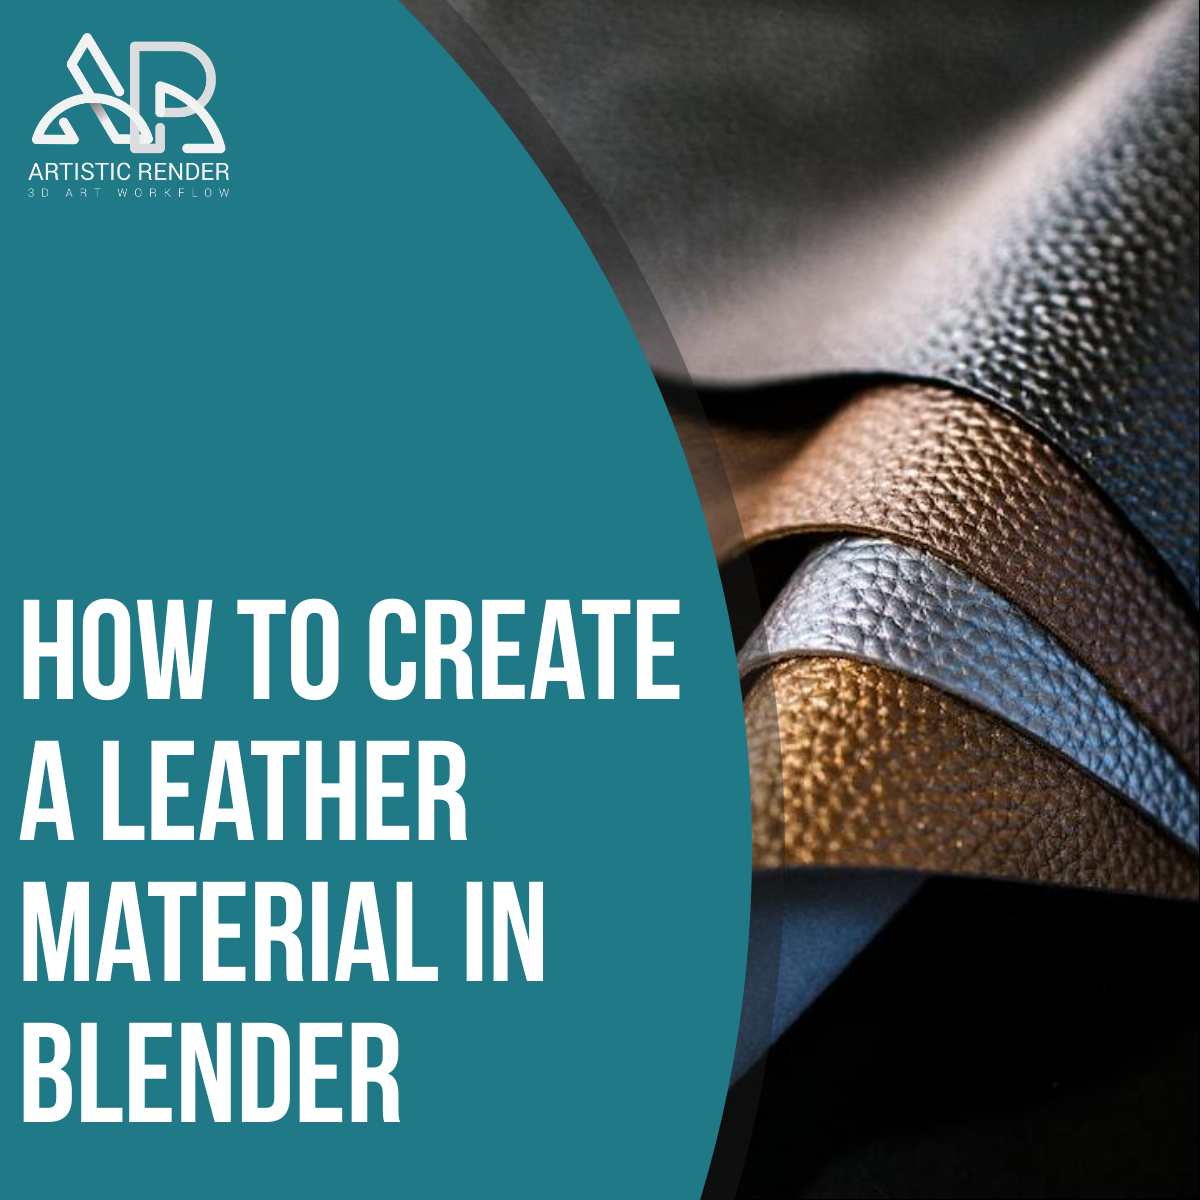 How to create a leather material in Blender - Artisticrender.com